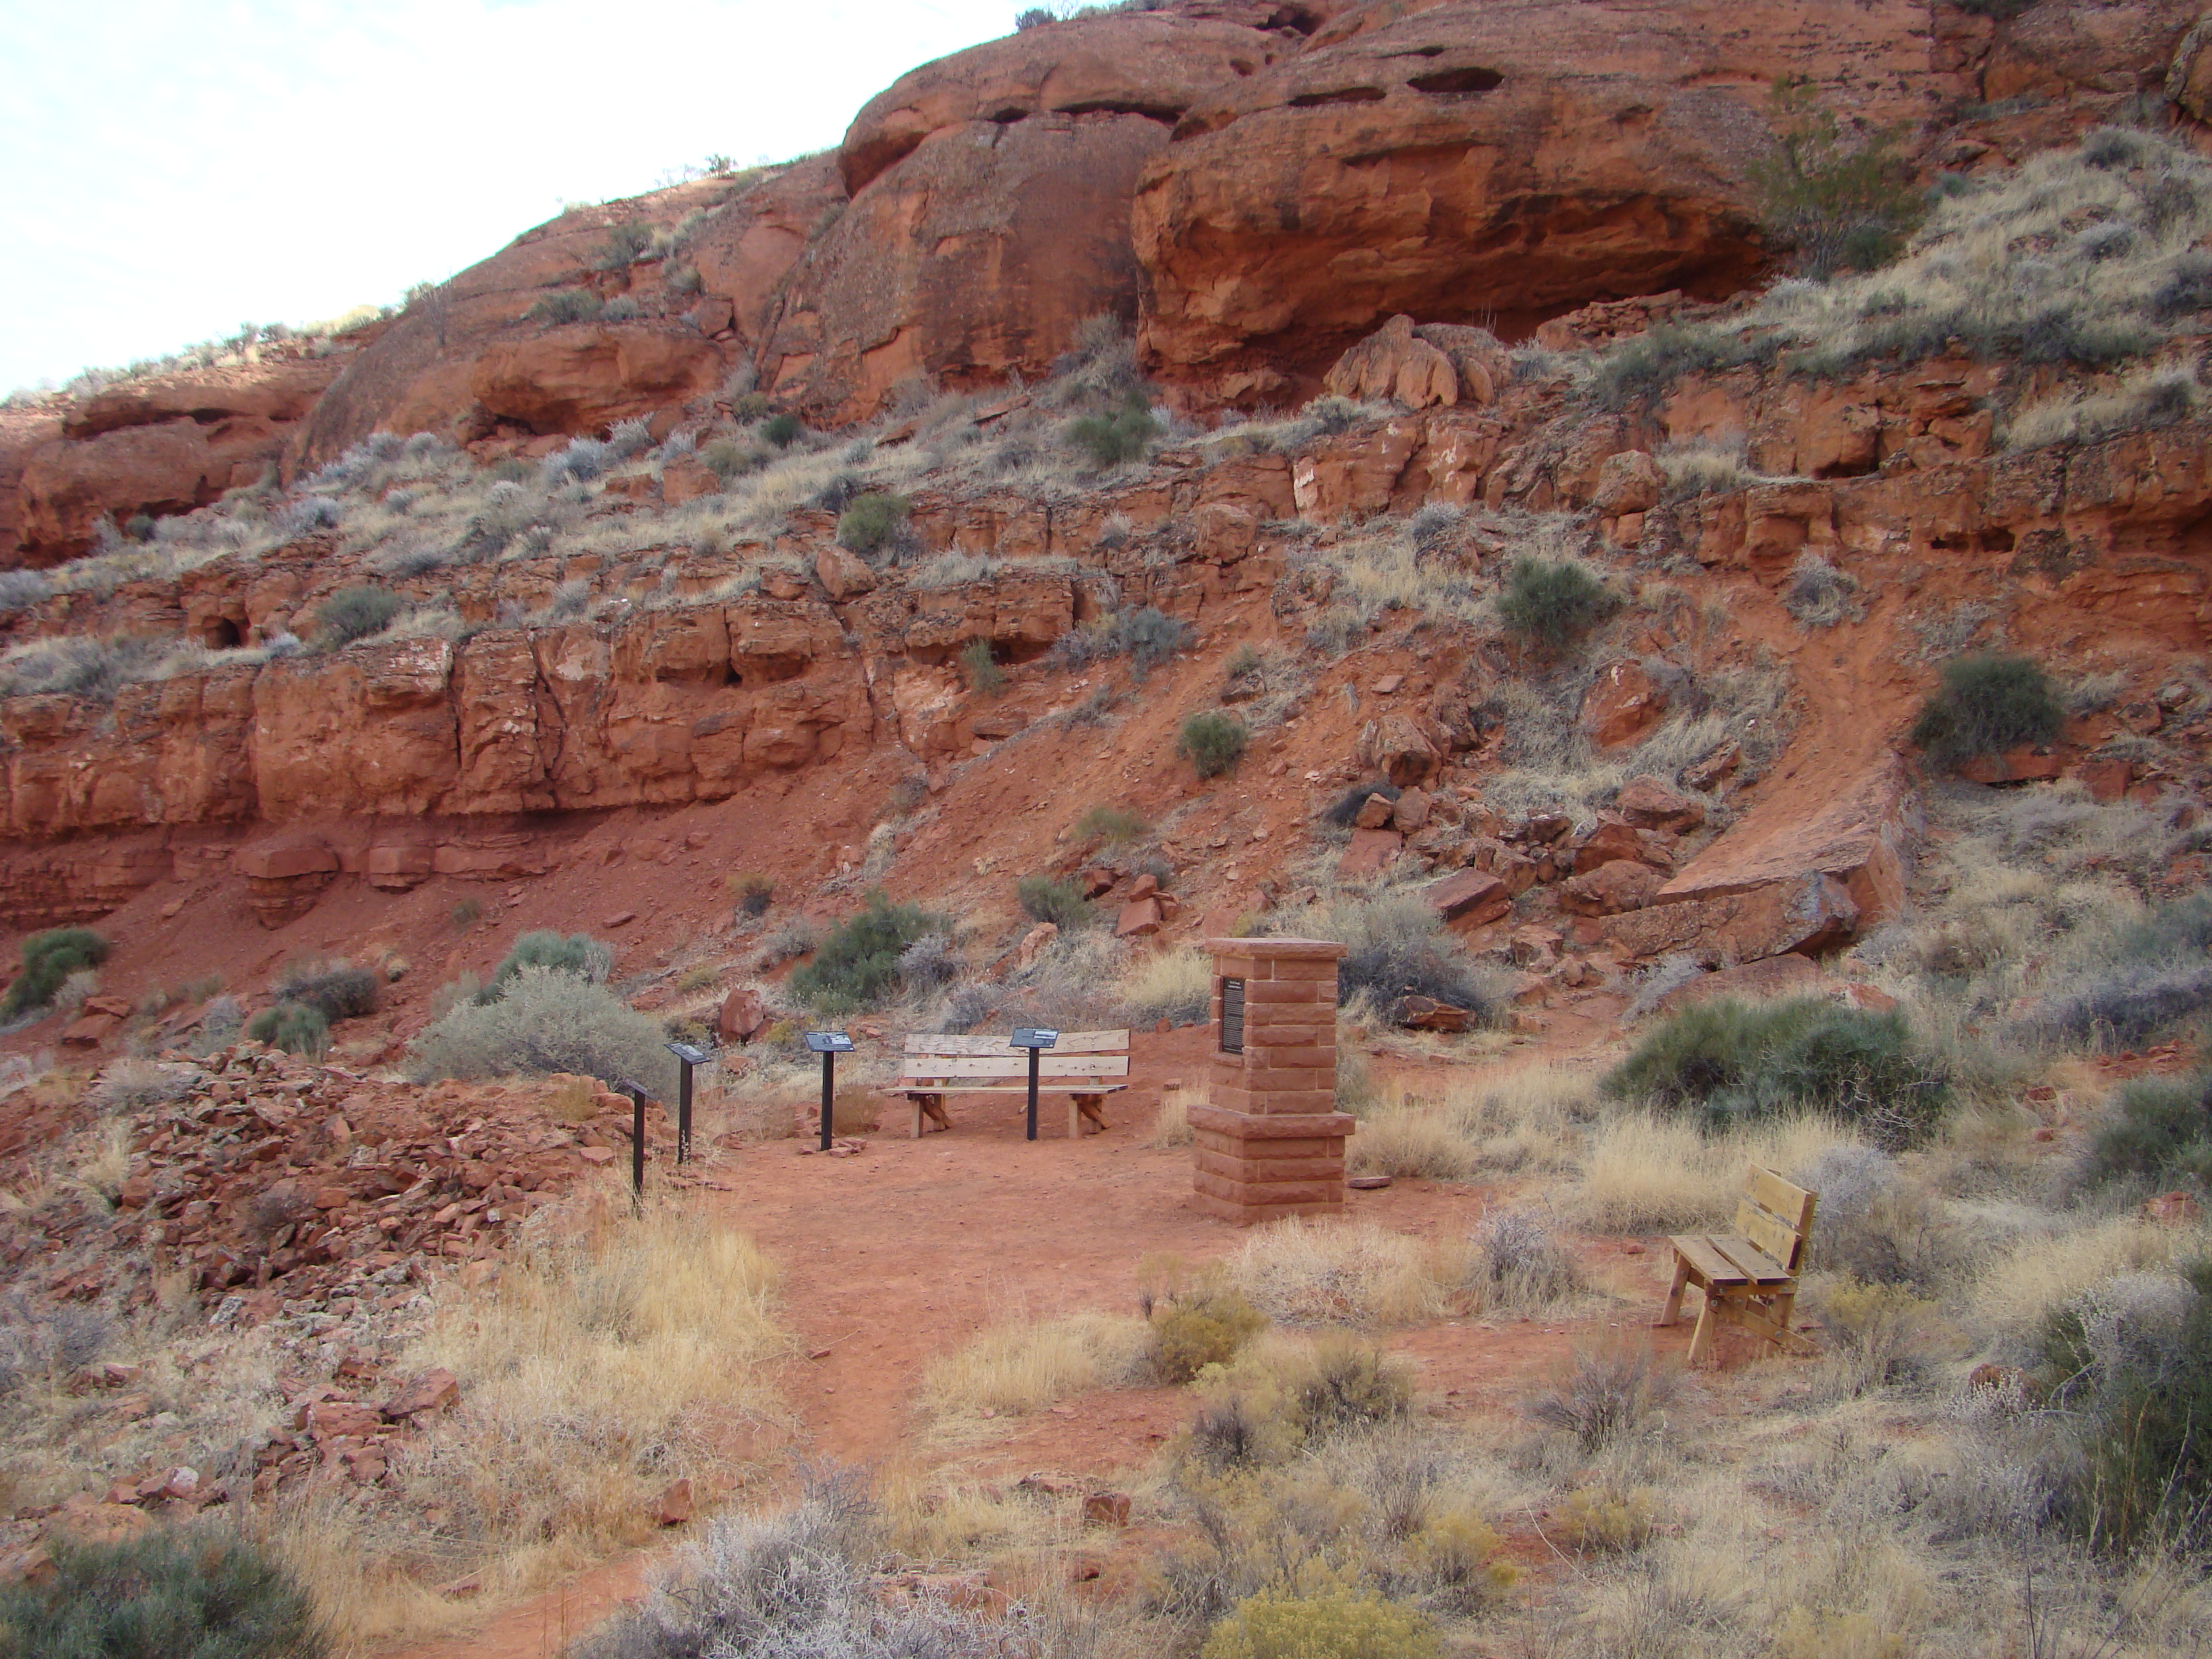 St. George Sandstone Quarry viewing area